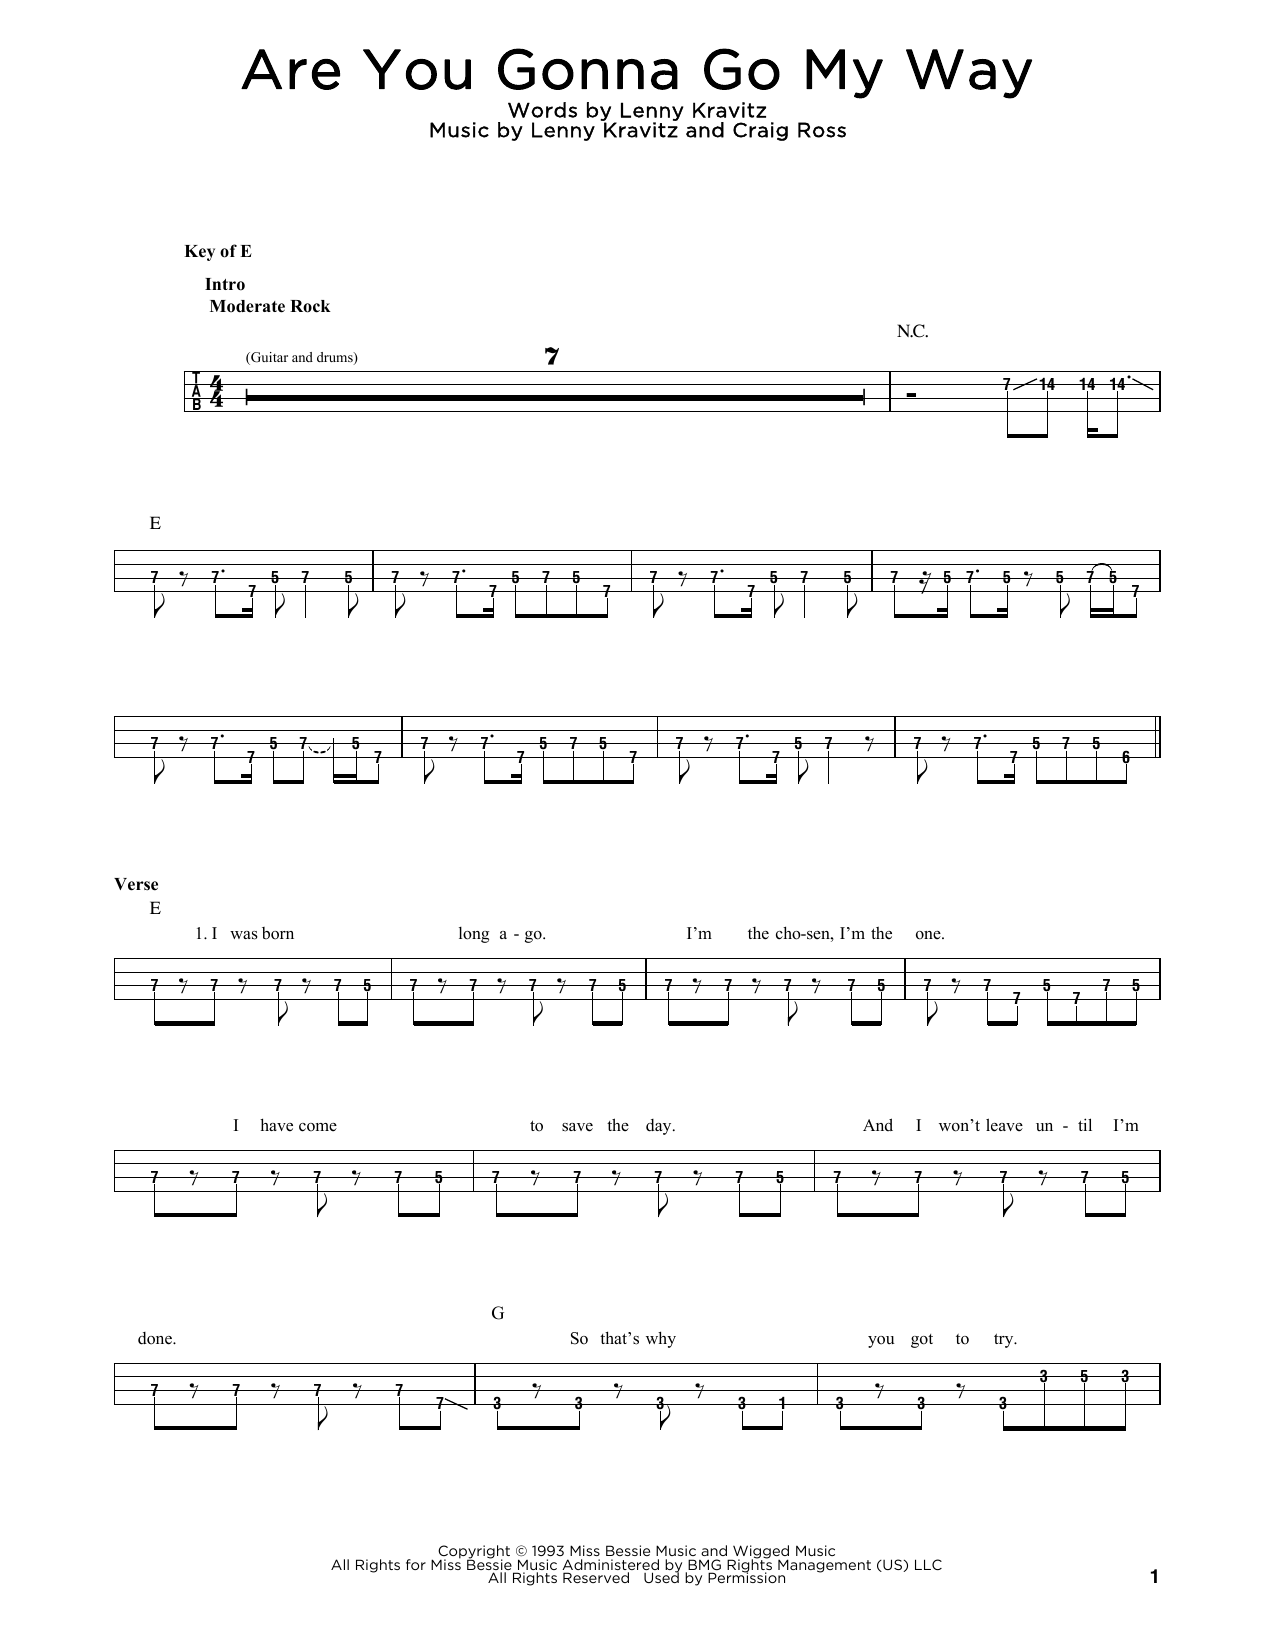 Download Lenny Kravitz Are You Gonna Go My Way Sheet Music